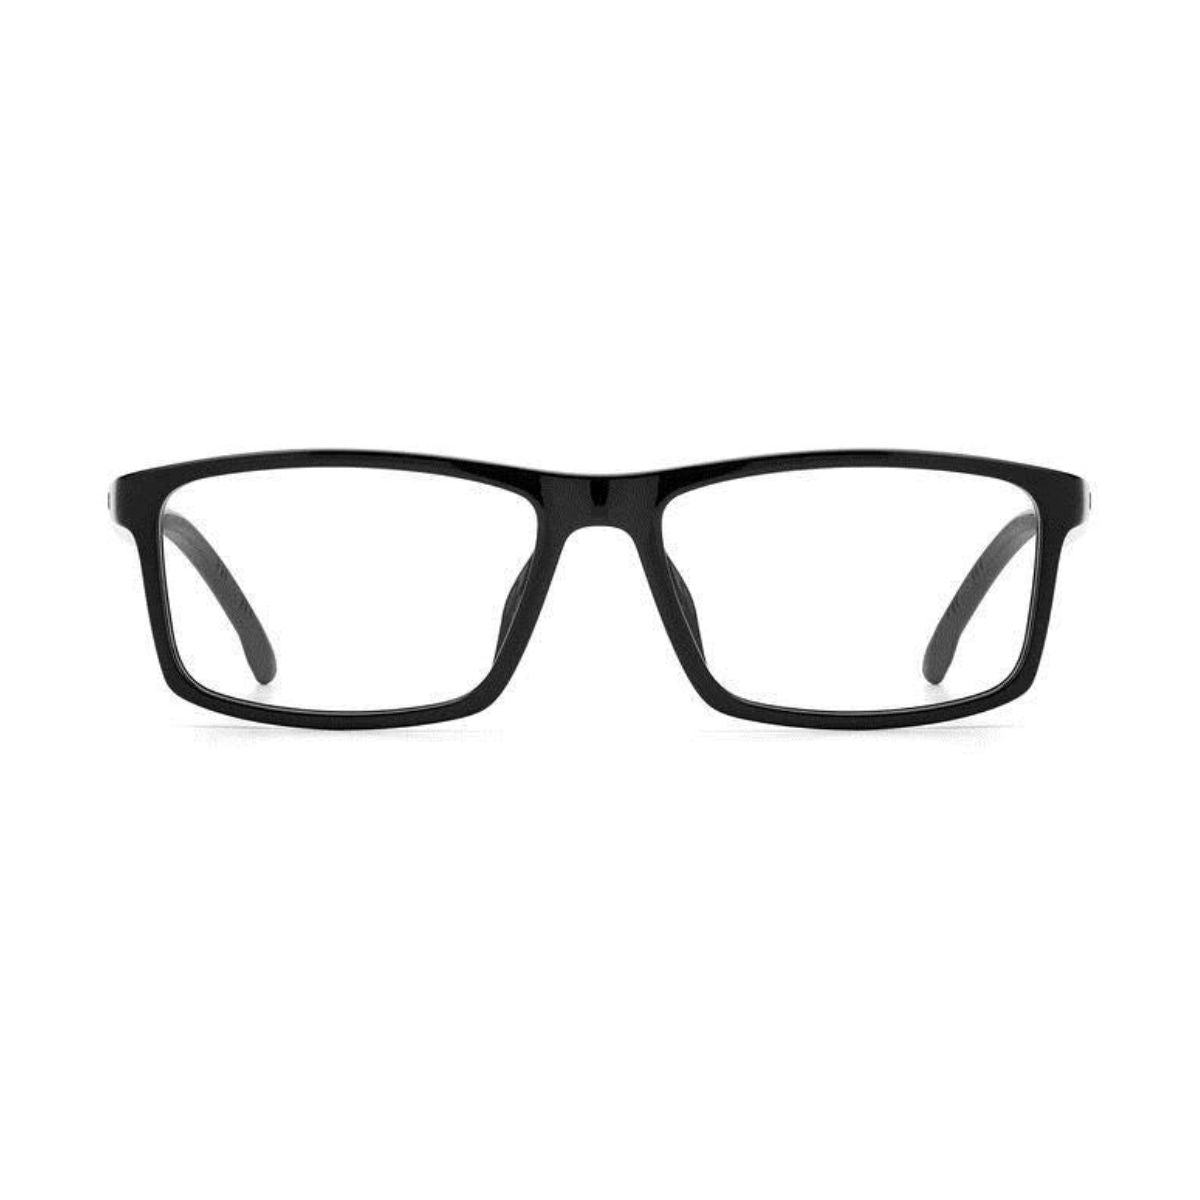 "Carrera 8872 807 rectangle frame for men's and women's at optorium"